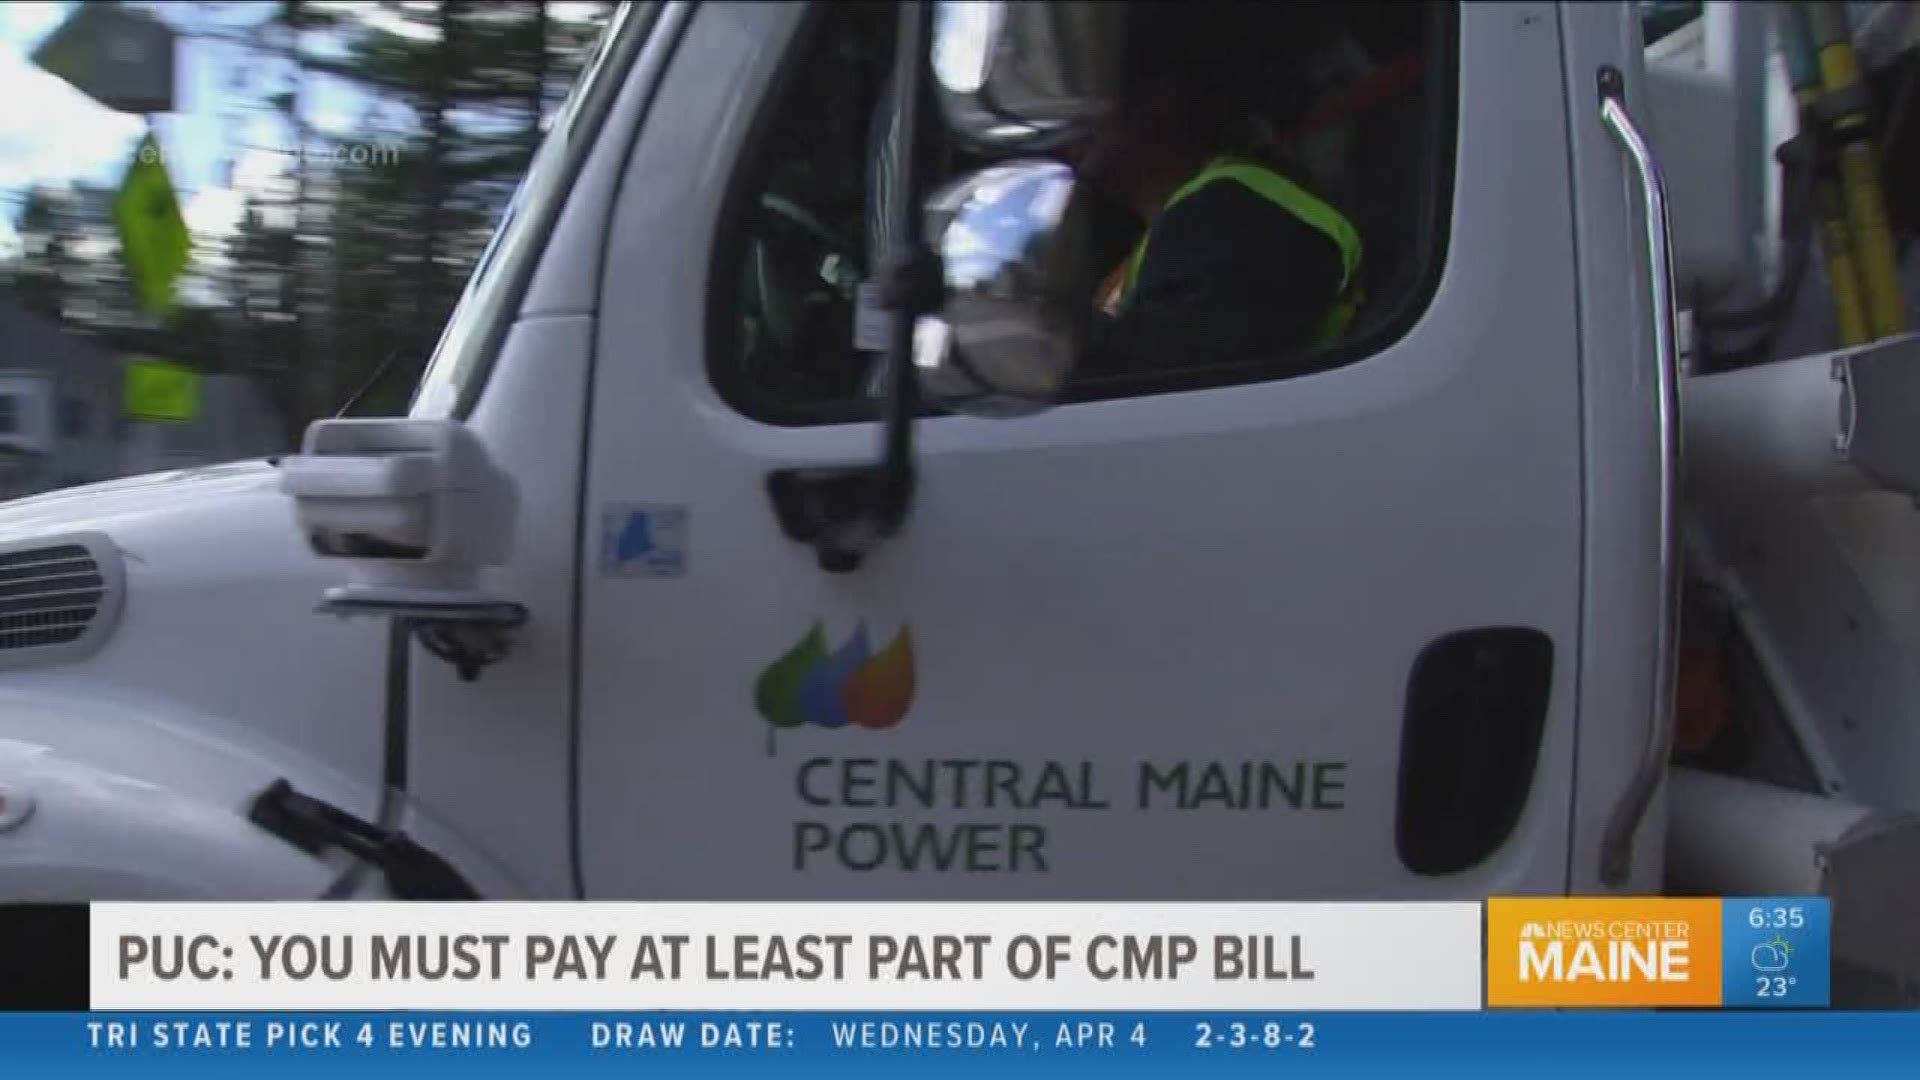 PUC rules customers must pay at least part of CMP bill even if they are disputing charges